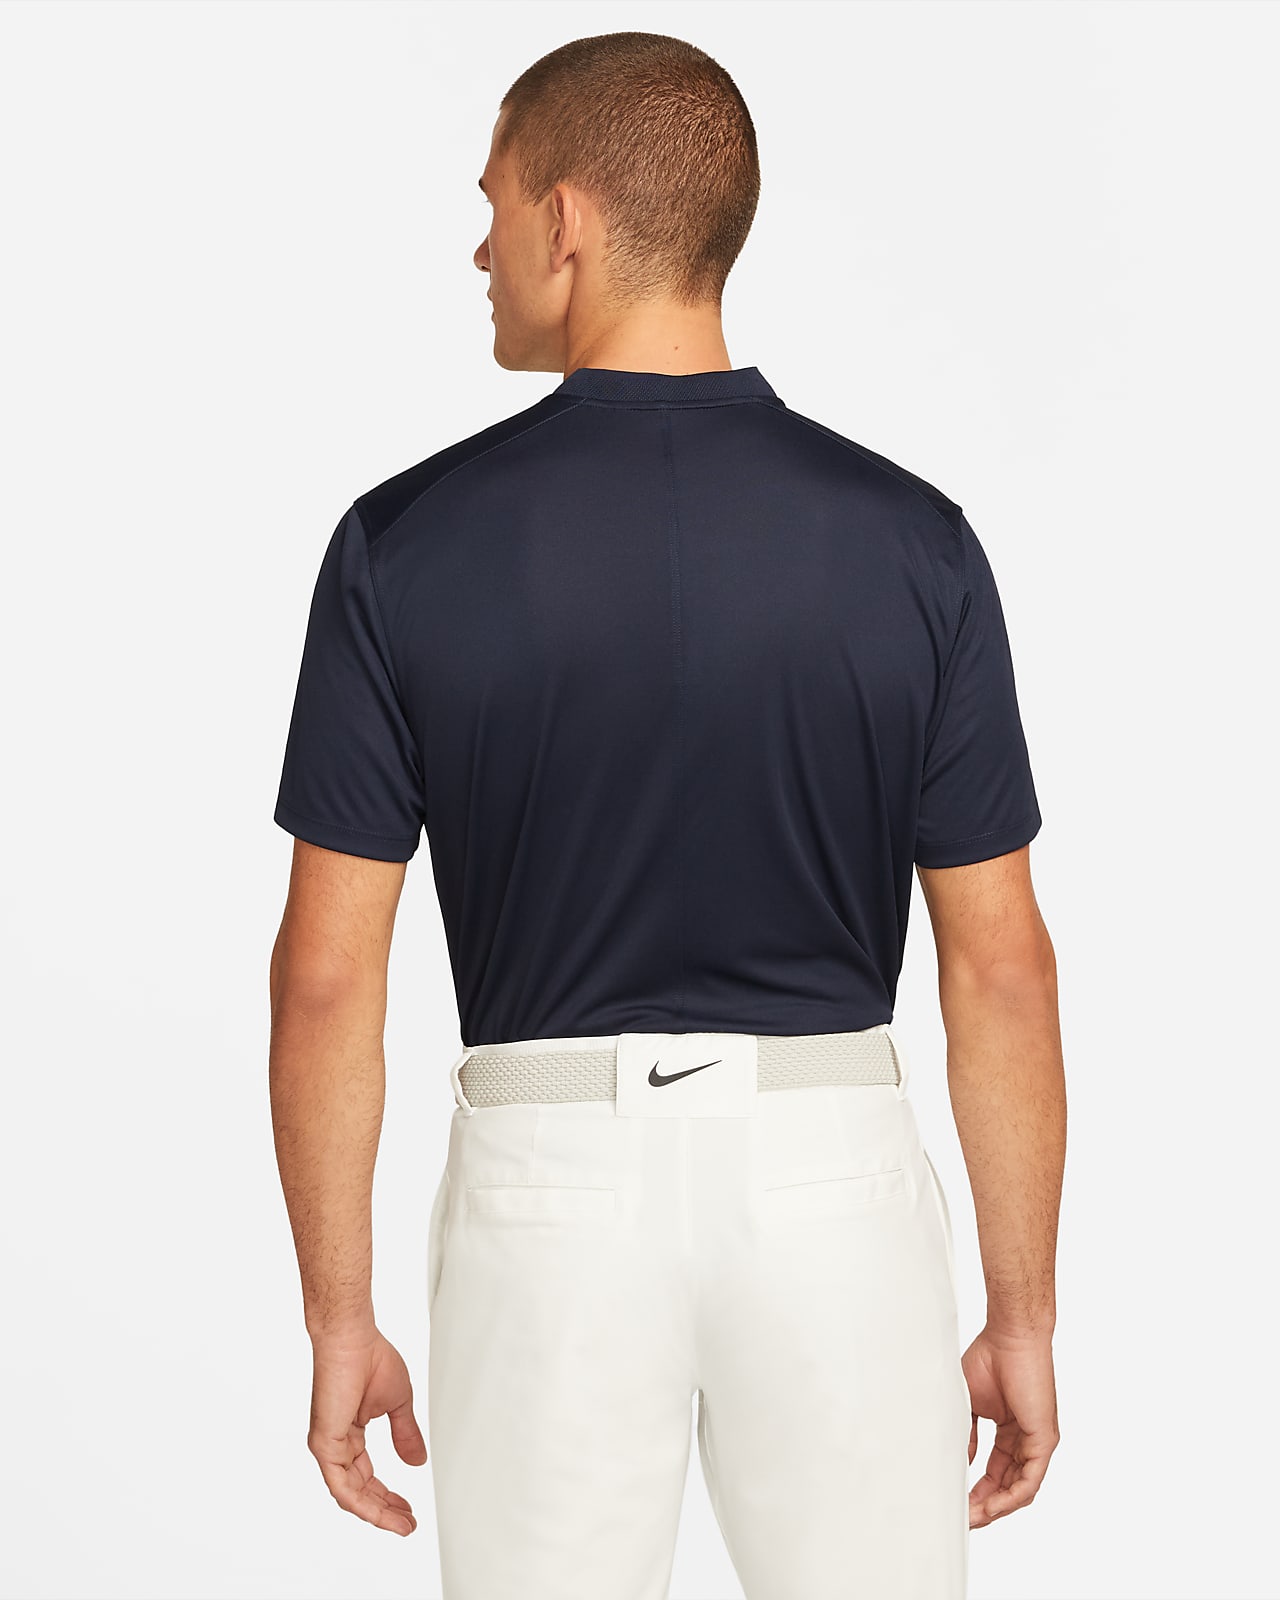 NIKE DRI-FIT VICTORY NAVY - POLO HOMME - Polo de golf NIKE - The